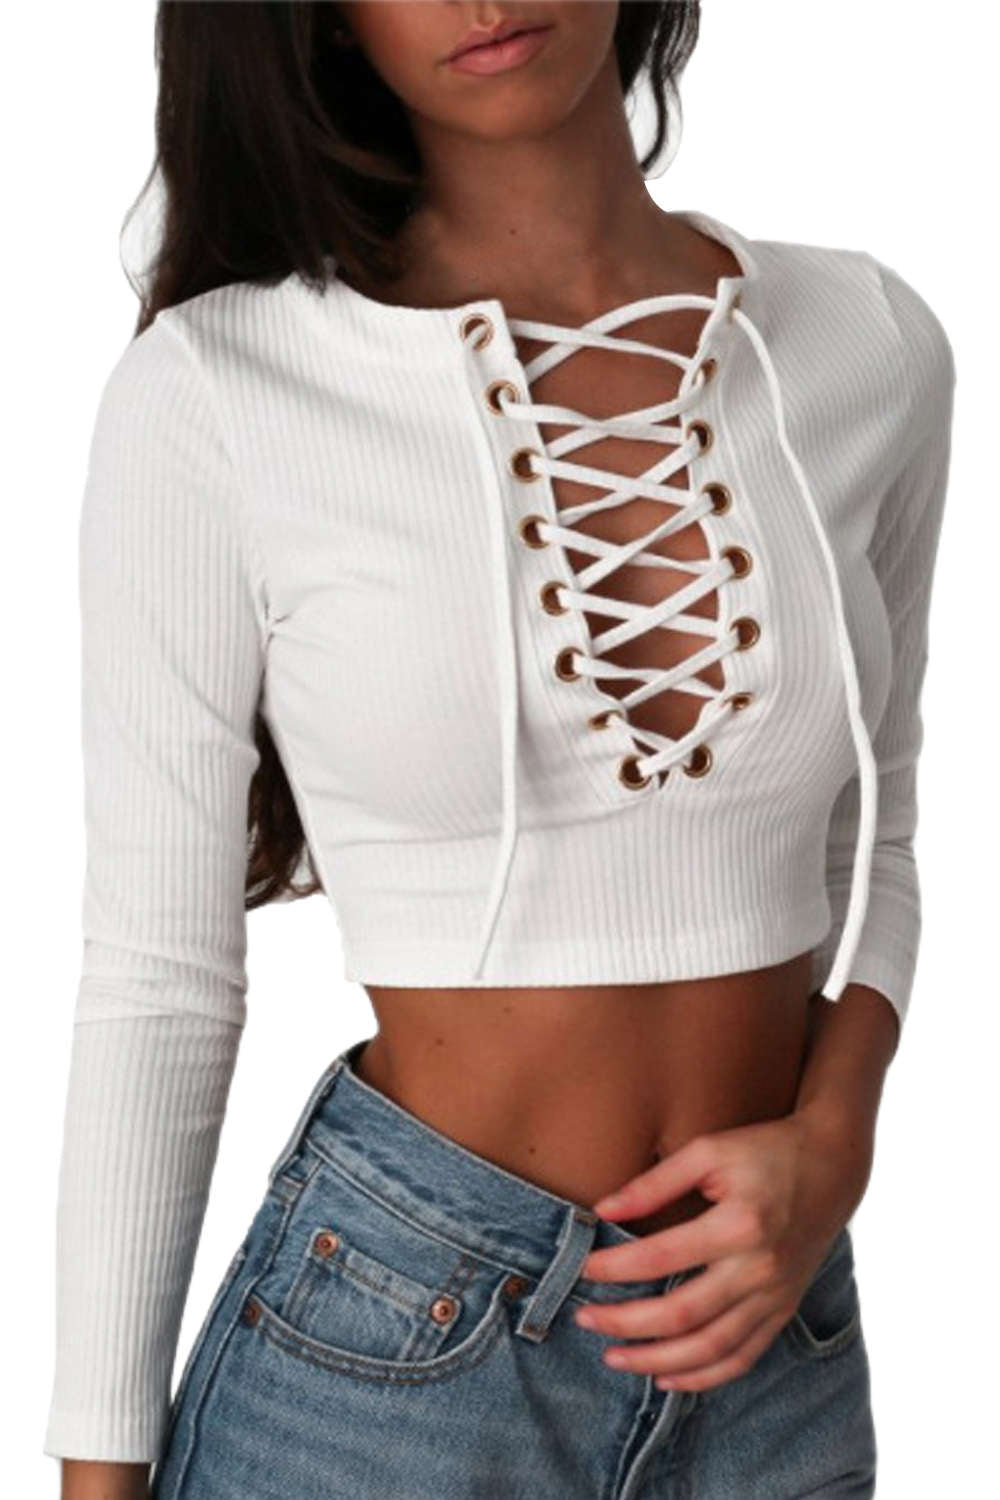 Iyasson Front Cross Cropped Sweater